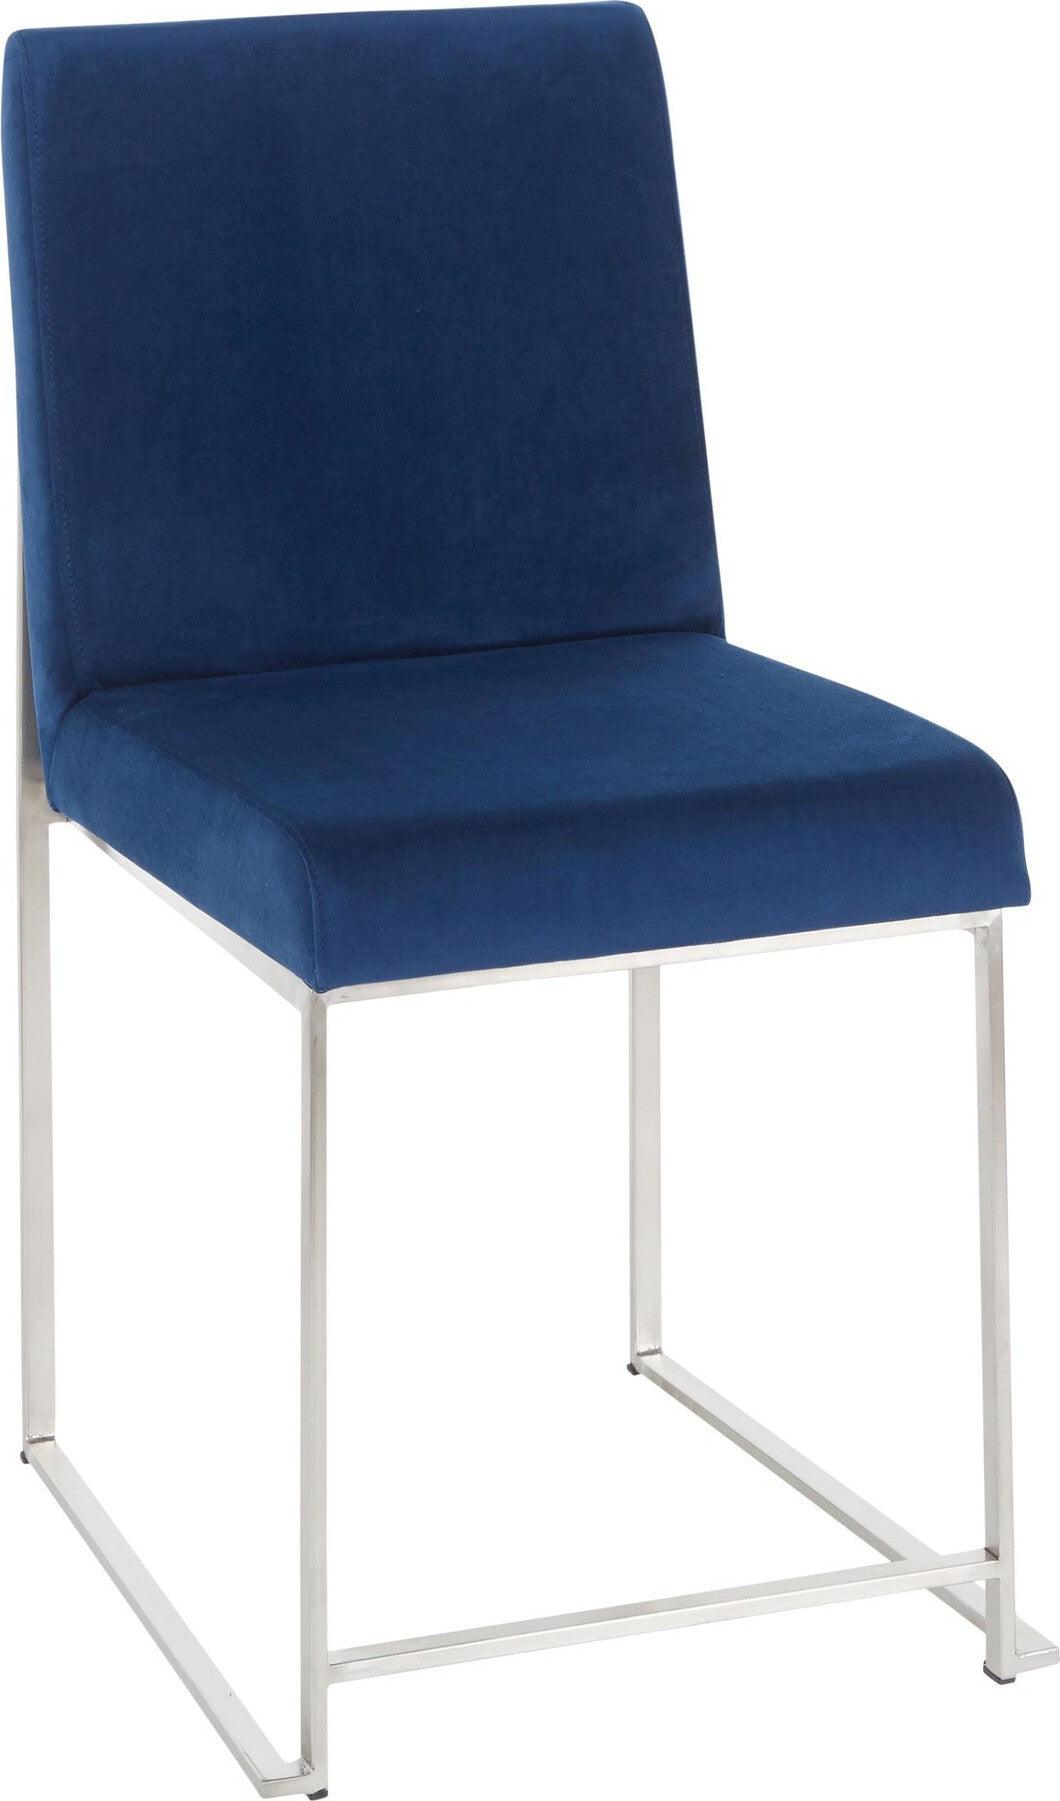 Lumisource Dining Chairs - High Back Fuji Contemporary Dining Chair in Stainless Steel and Blue Velvet (Set of 2)